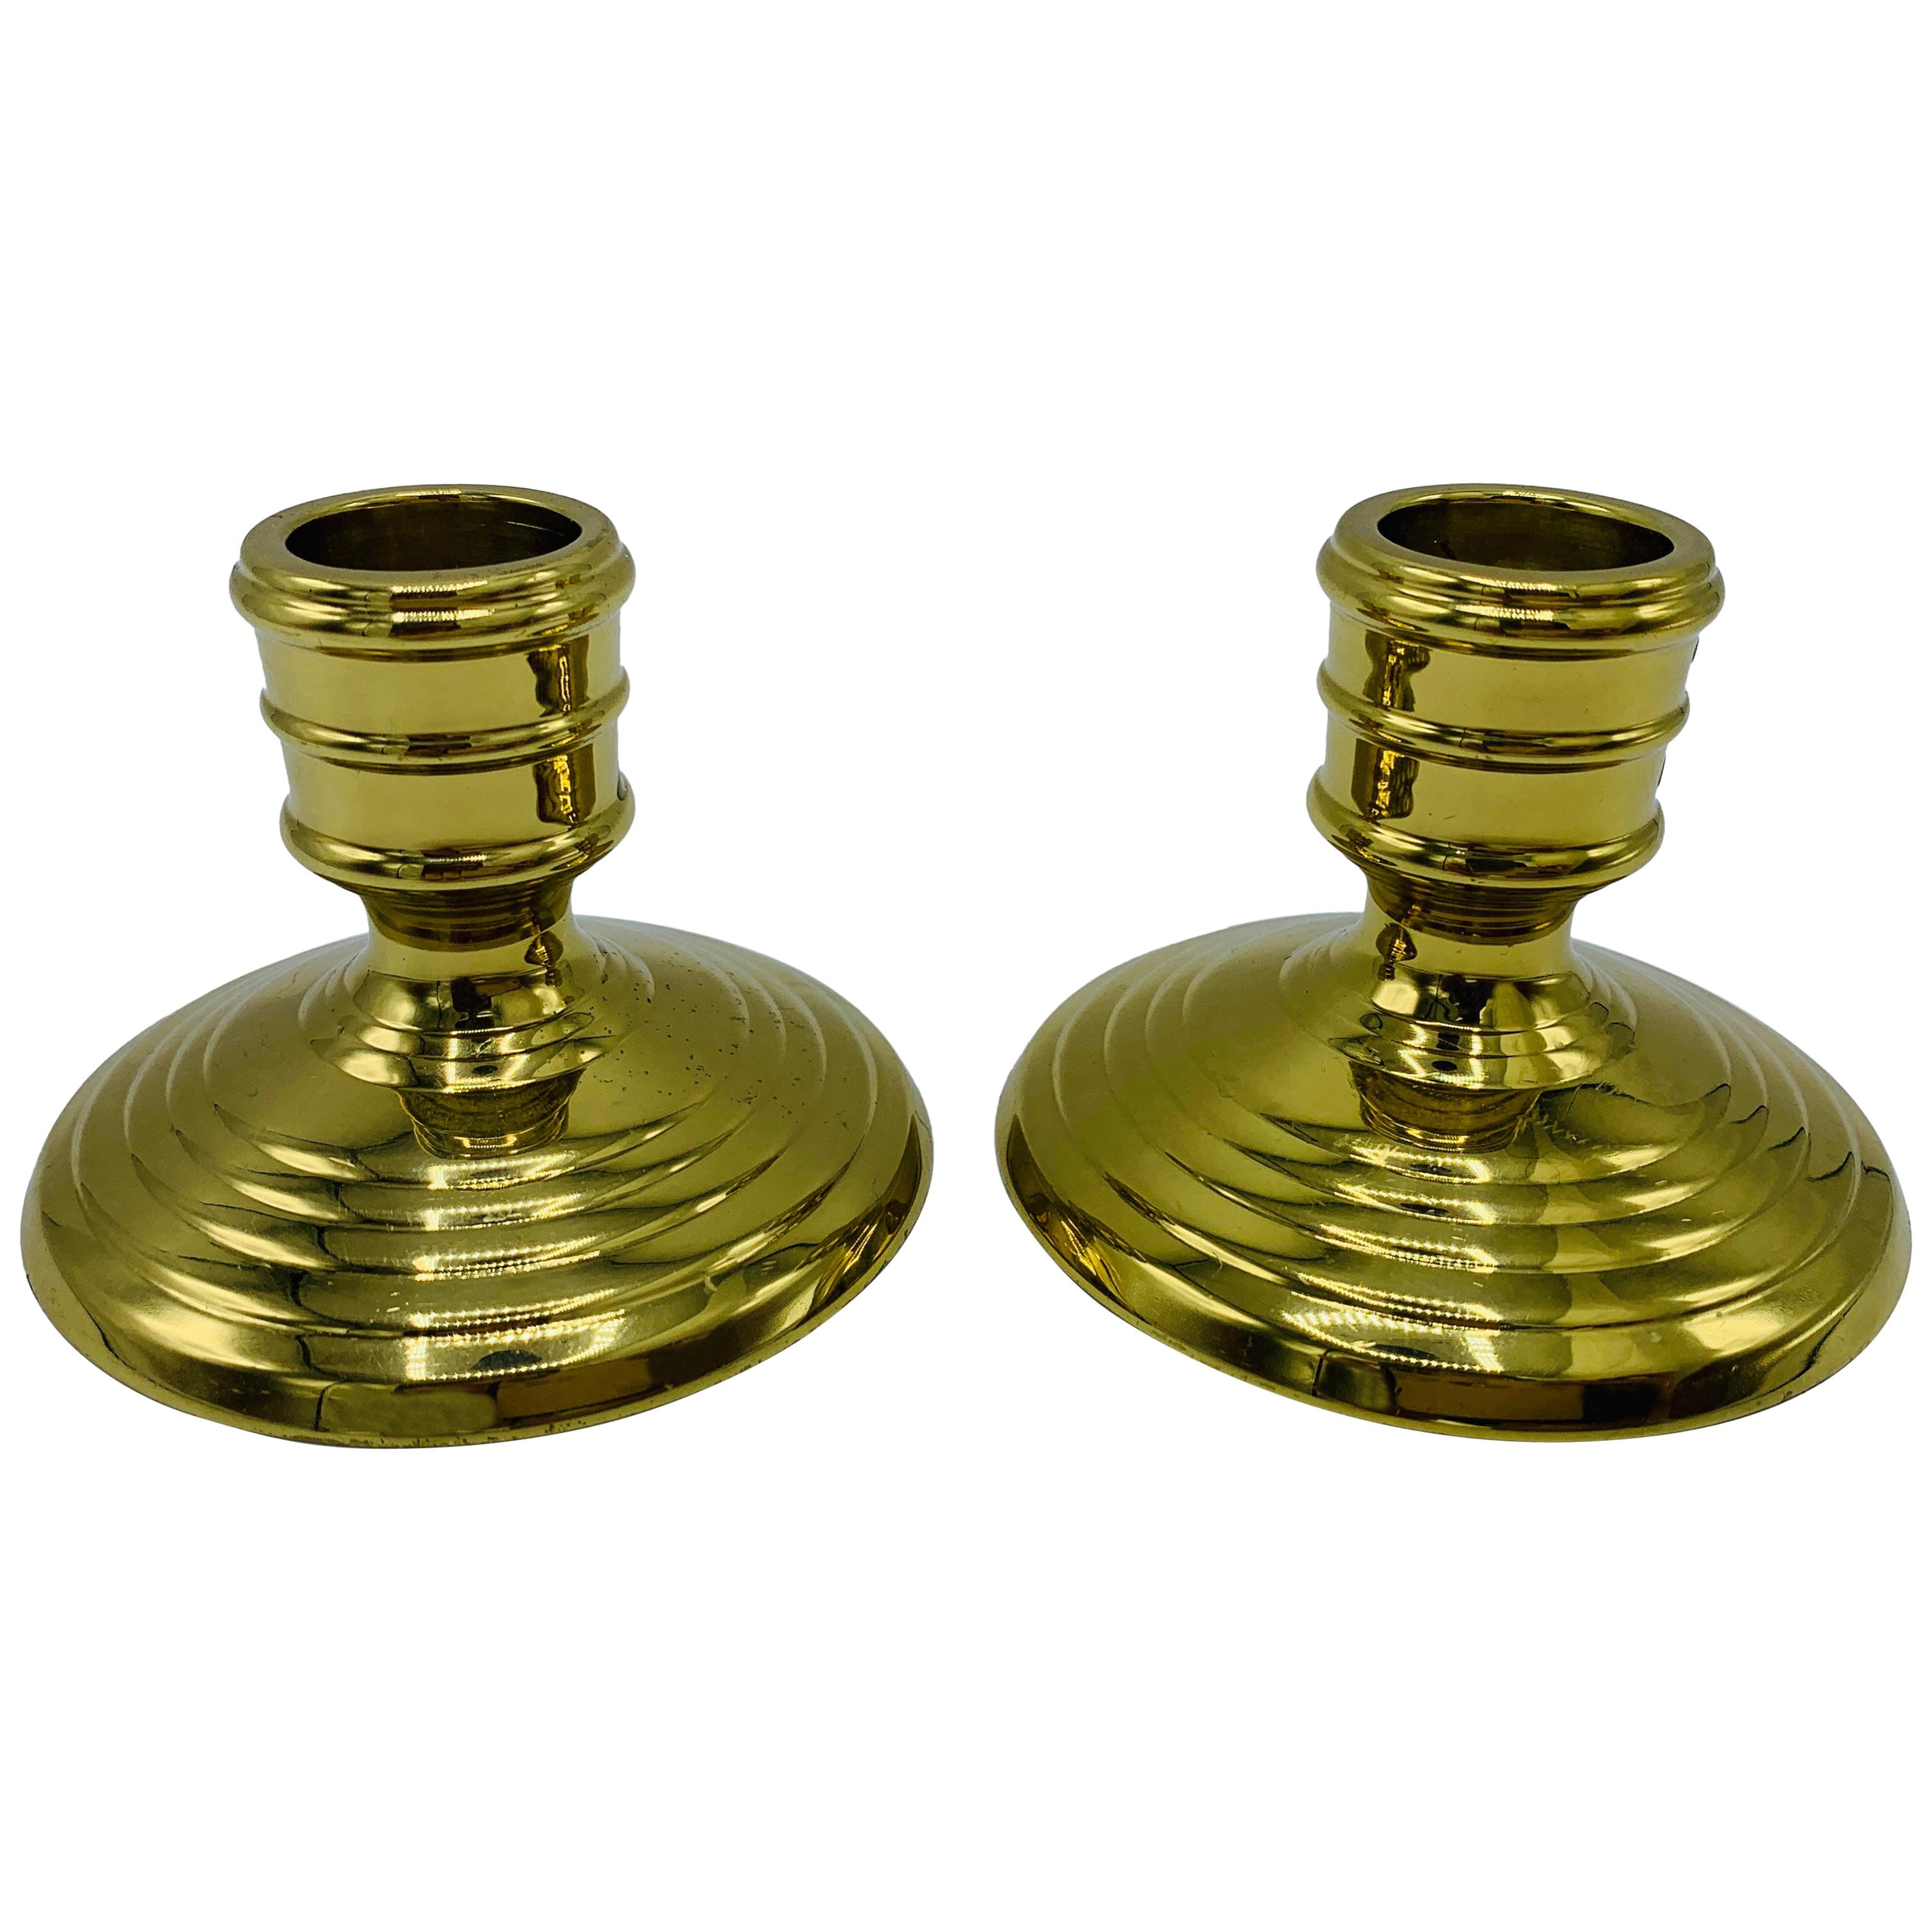 1950s Virginia Metalcrafters Brass Candlesticks, Pair For Sale